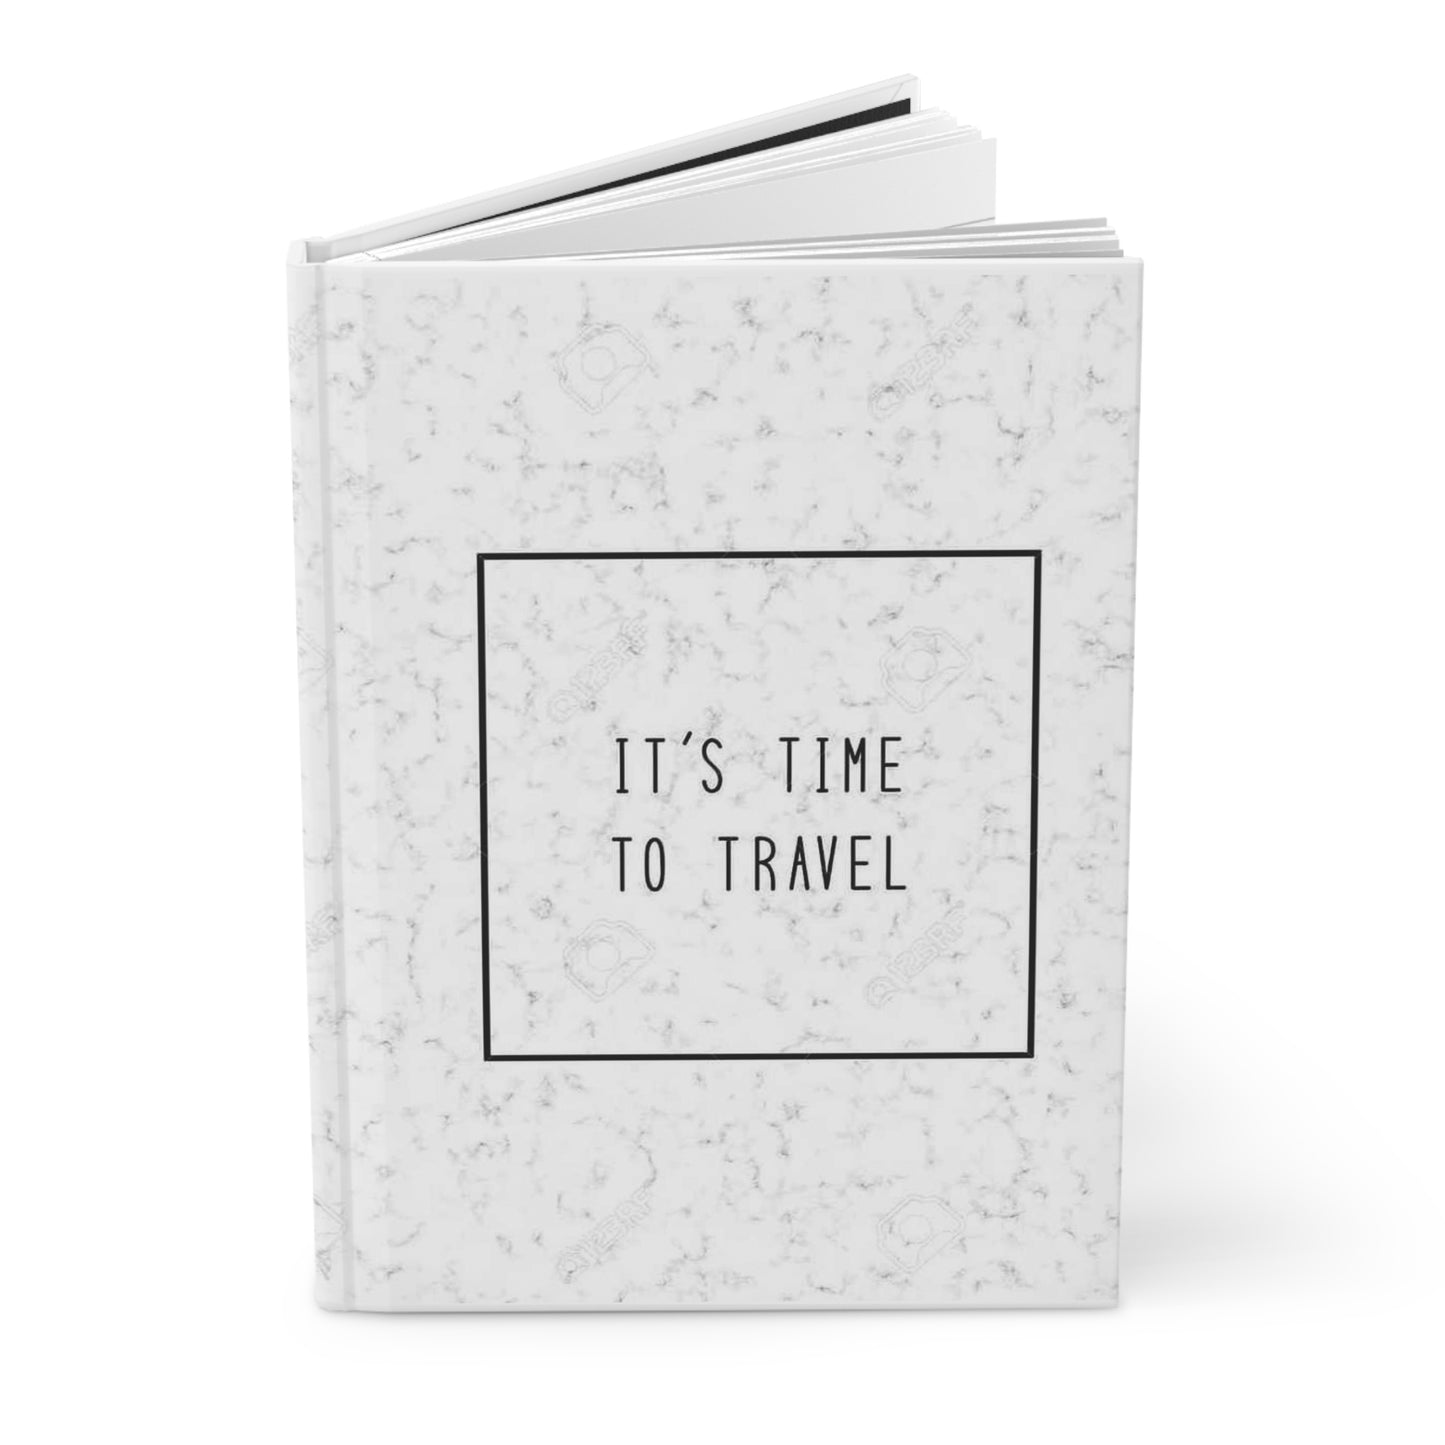 Traveler's Hardcover Journal Matte Journal: Capture Your Journey (TIME TO TRAVEL)